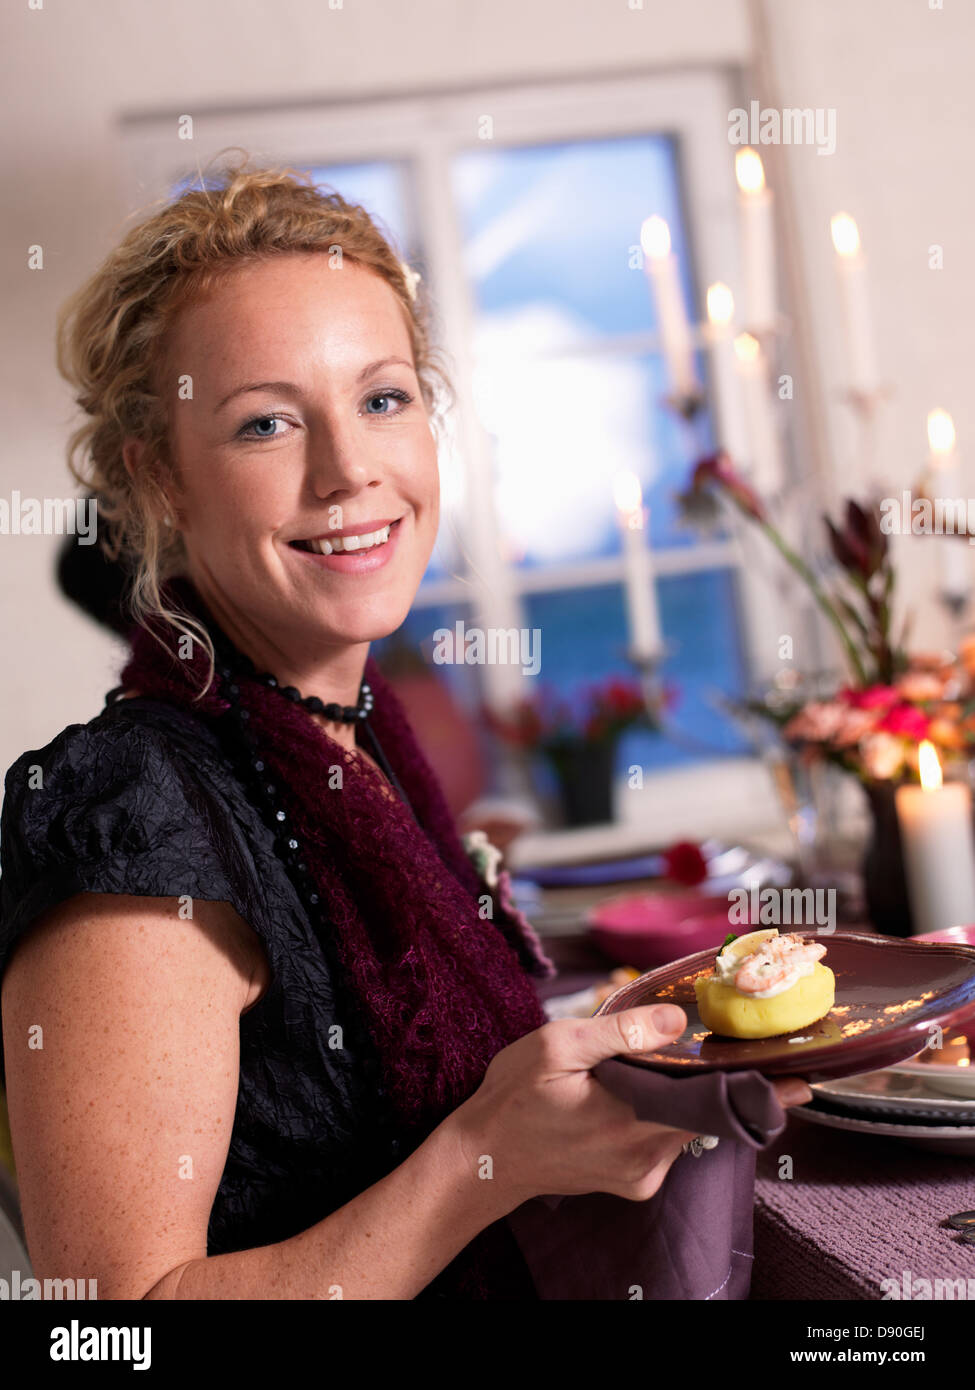 Smiling woman holding plate with appetiser Stock Photo